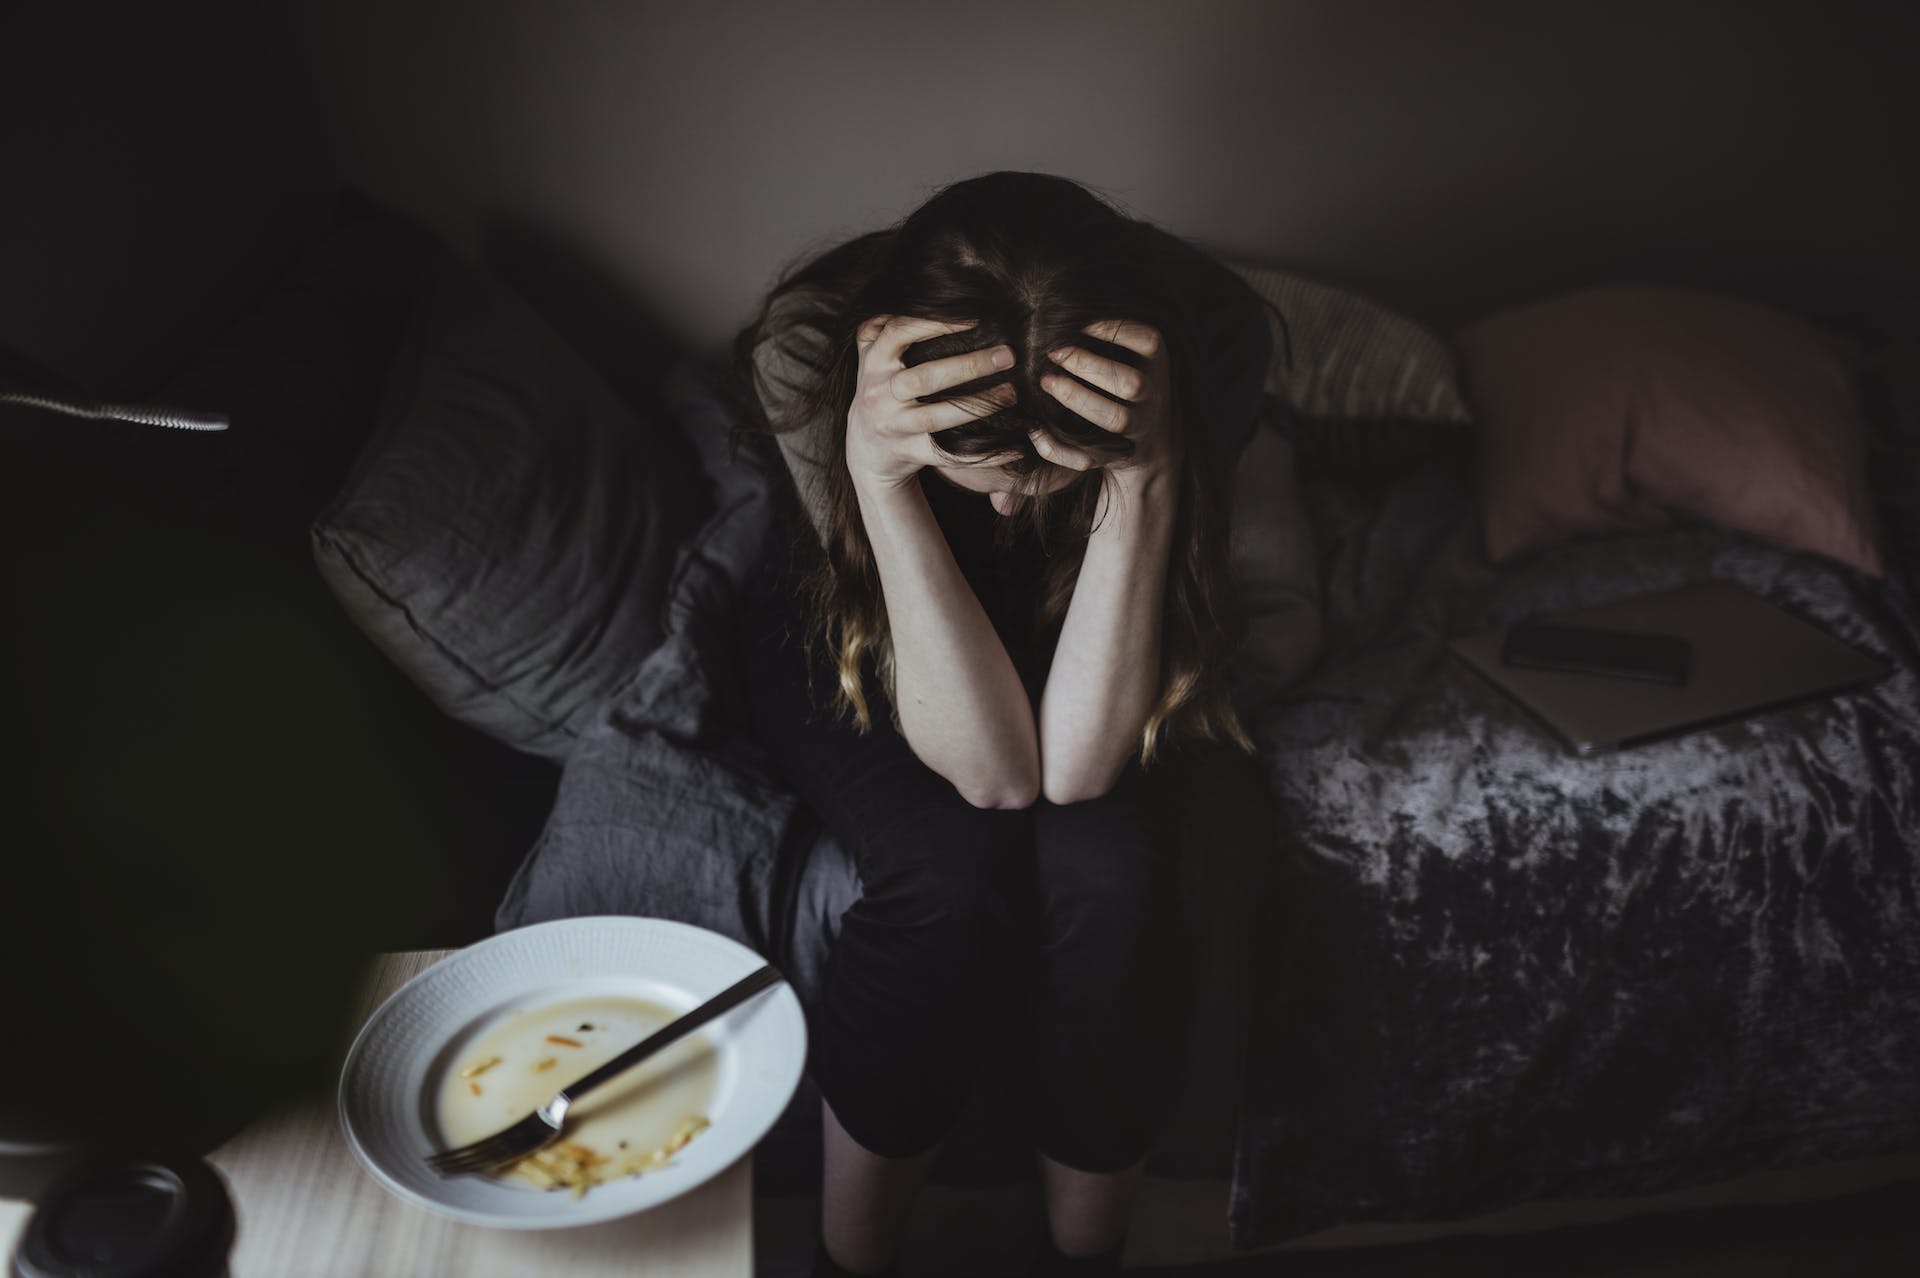 Eating disorders are the most lethal mental health conditions – reconnecting with internal body sensations can help reduce self-harm